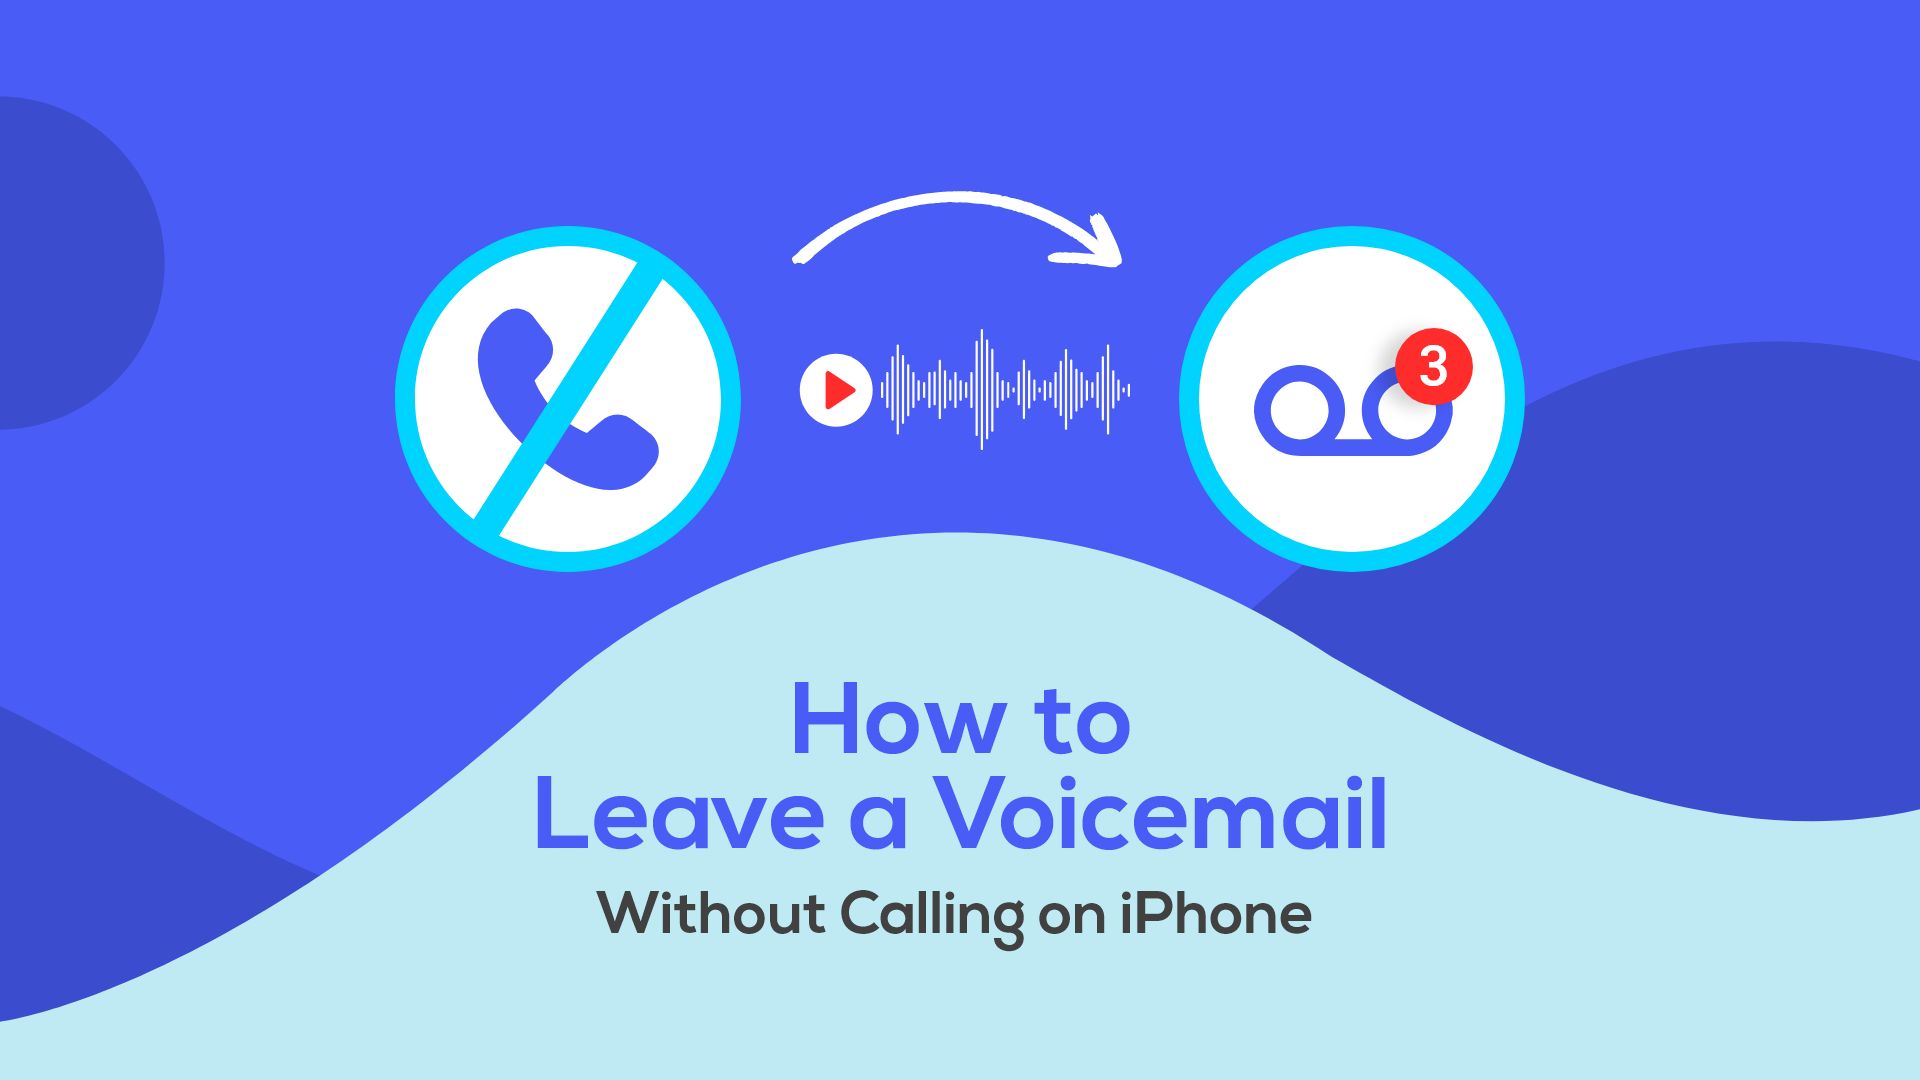 How to Leave a Voicemail Without Calling on iPhone